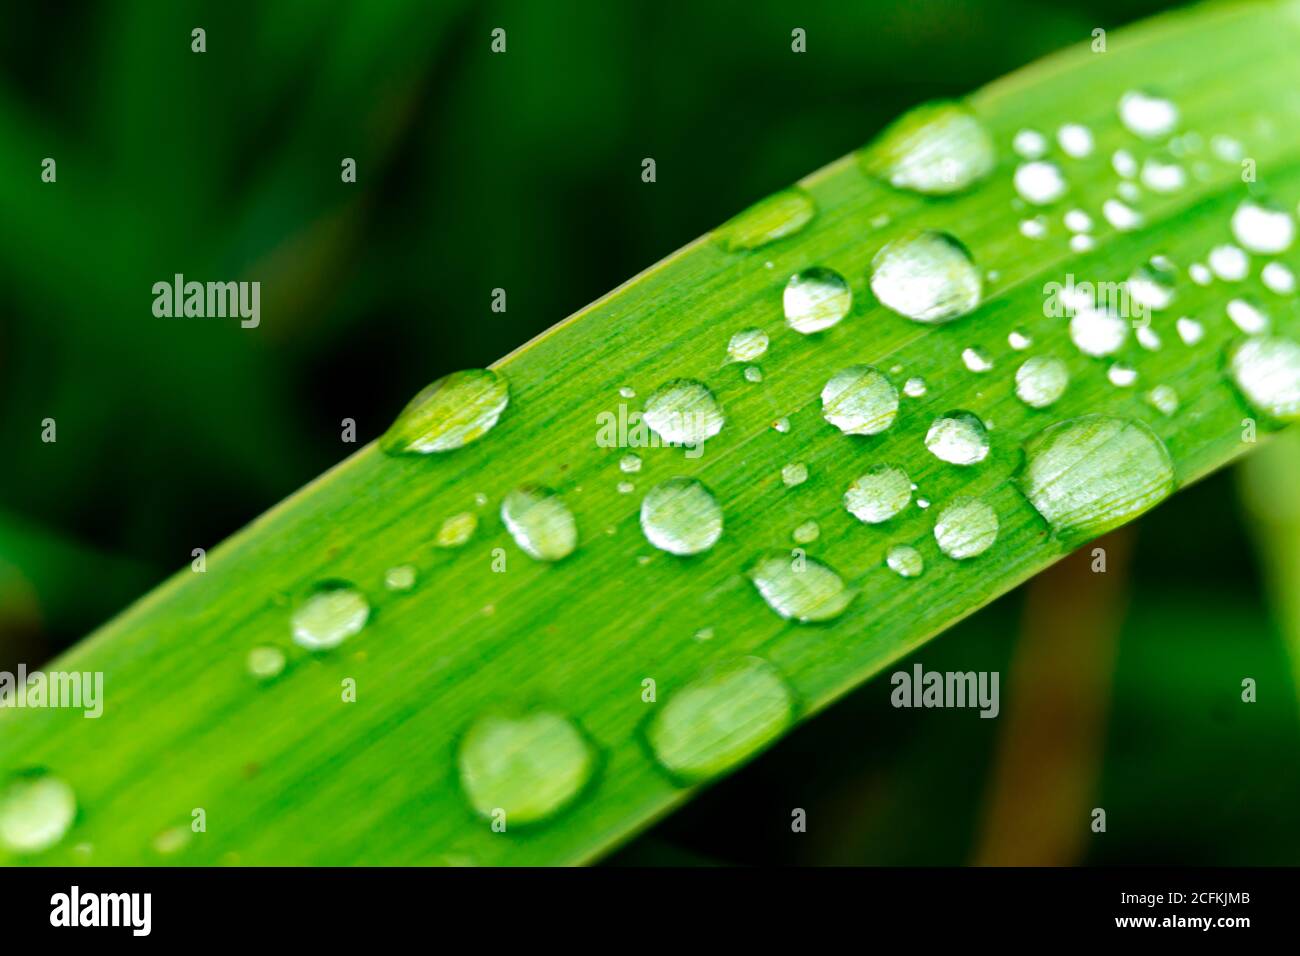 Waterdrops on grass Stock Photo